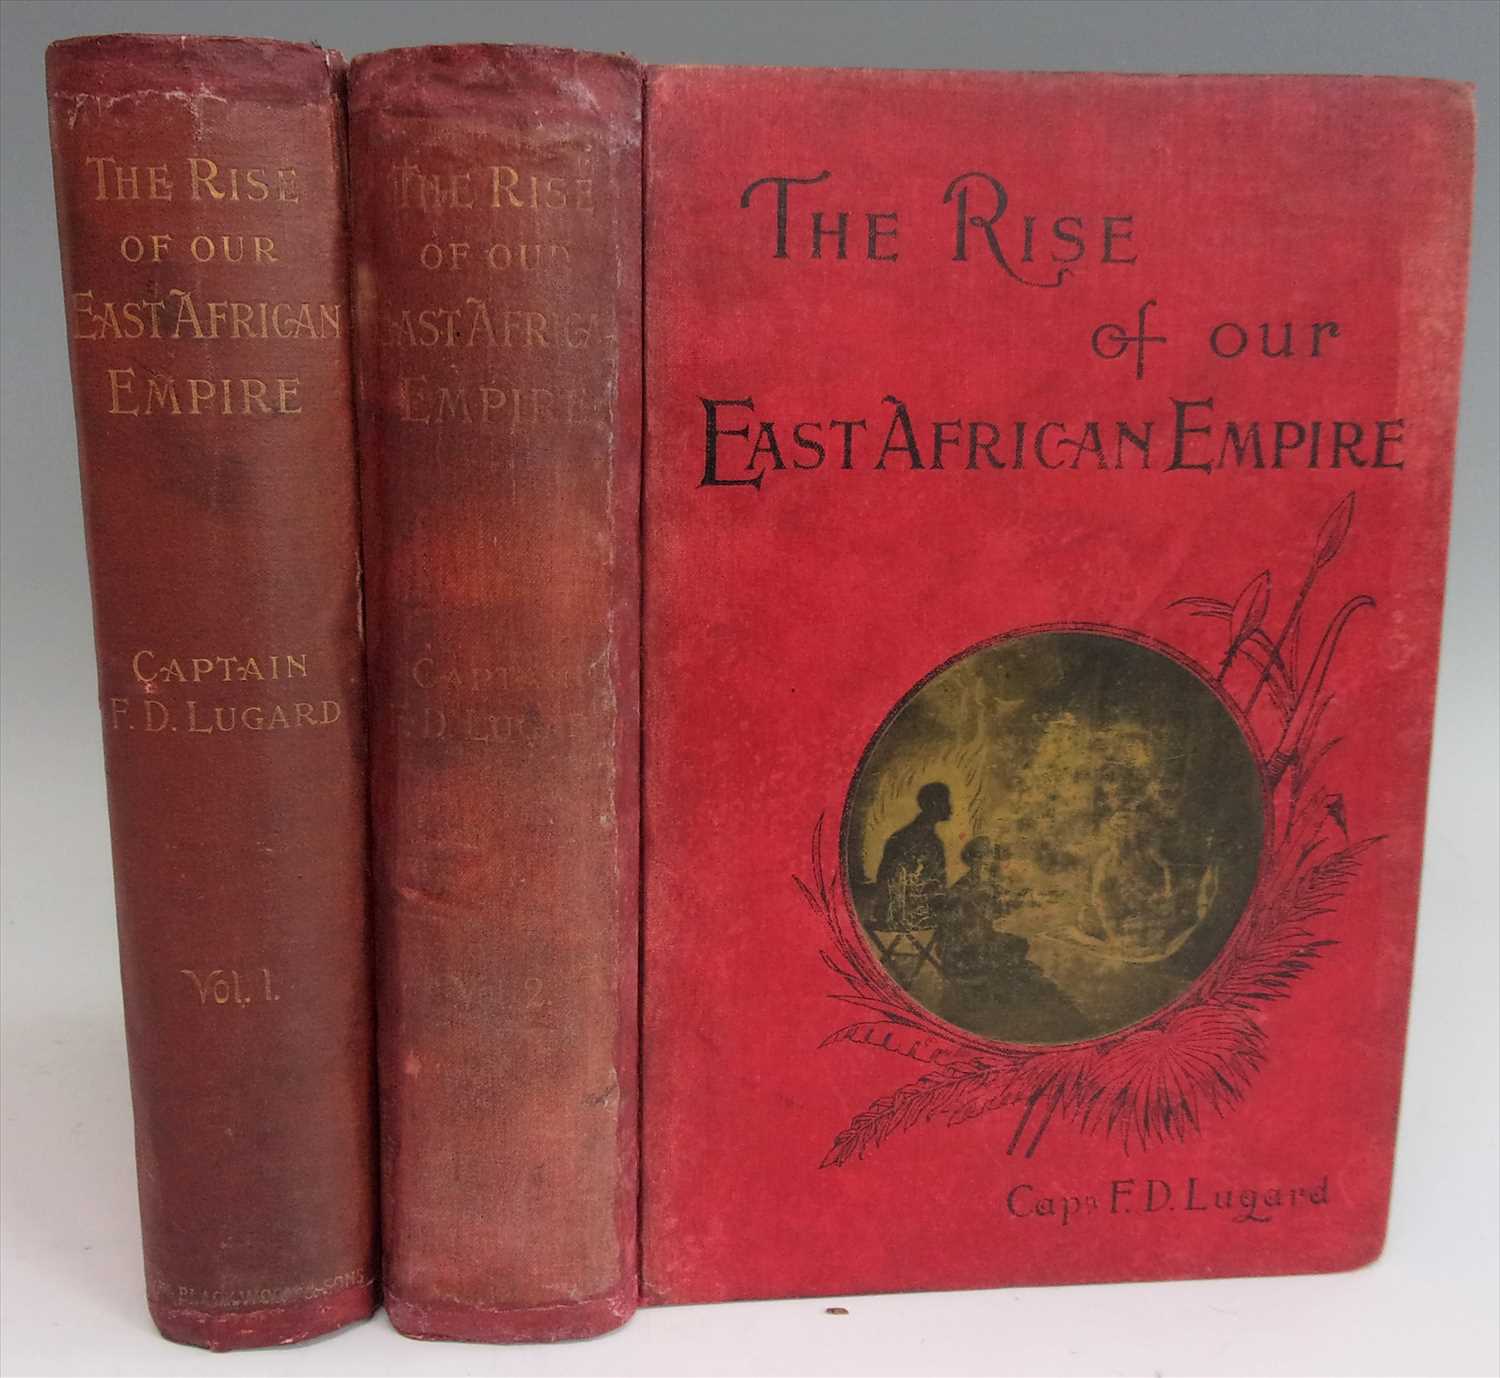 LUGARD, Capt. F. D. The Rise of Our East African Empire. William Blackwood & Sons, London, [1893]